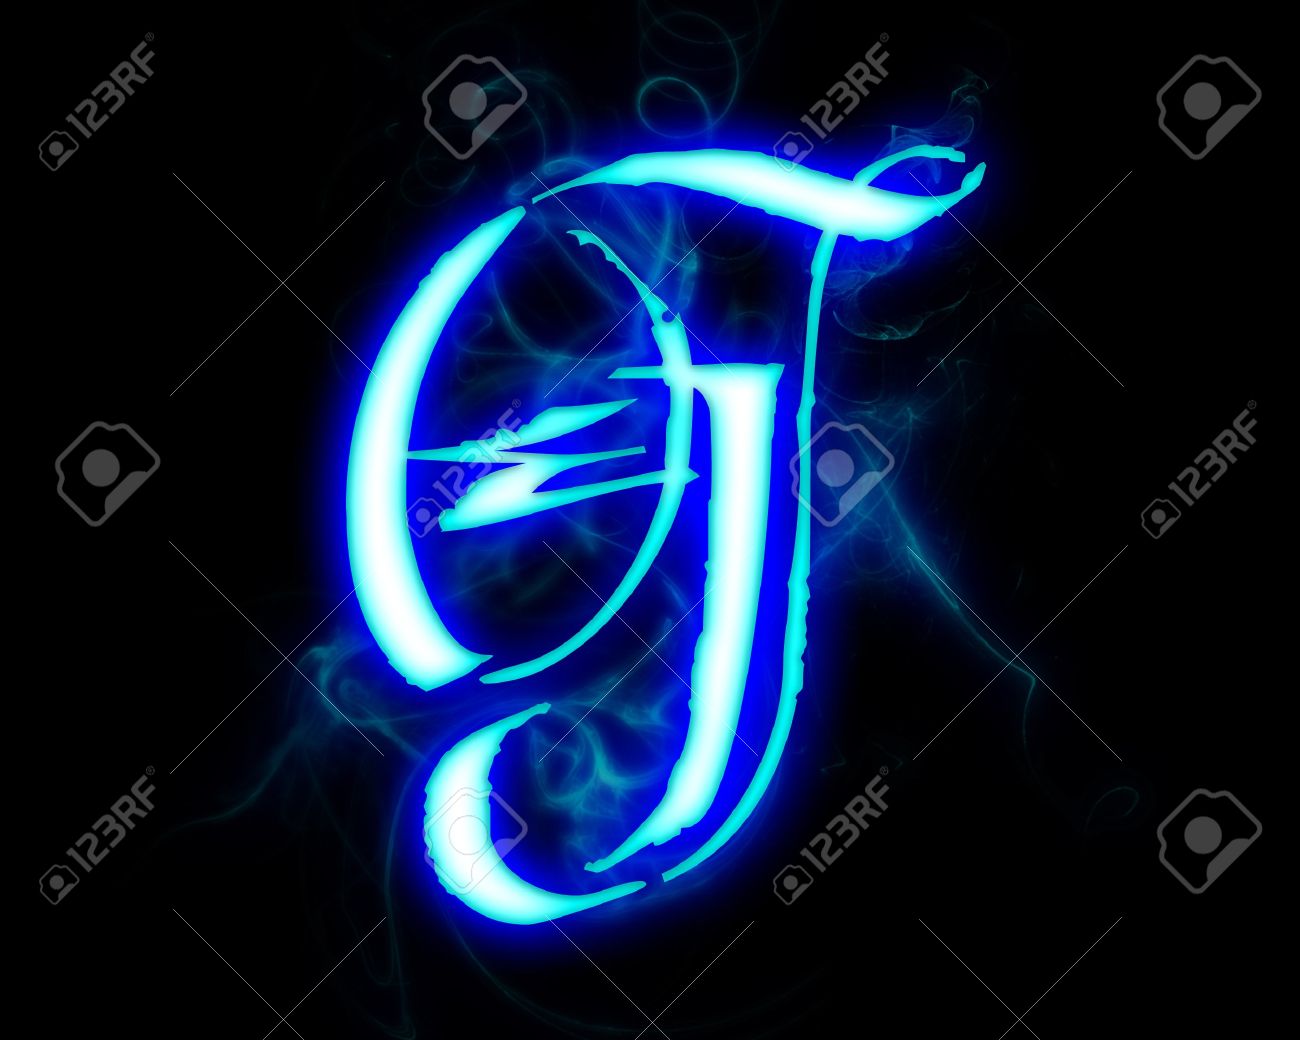 Blue Flame Magic Font Over Black Background Letter G Stock Photo